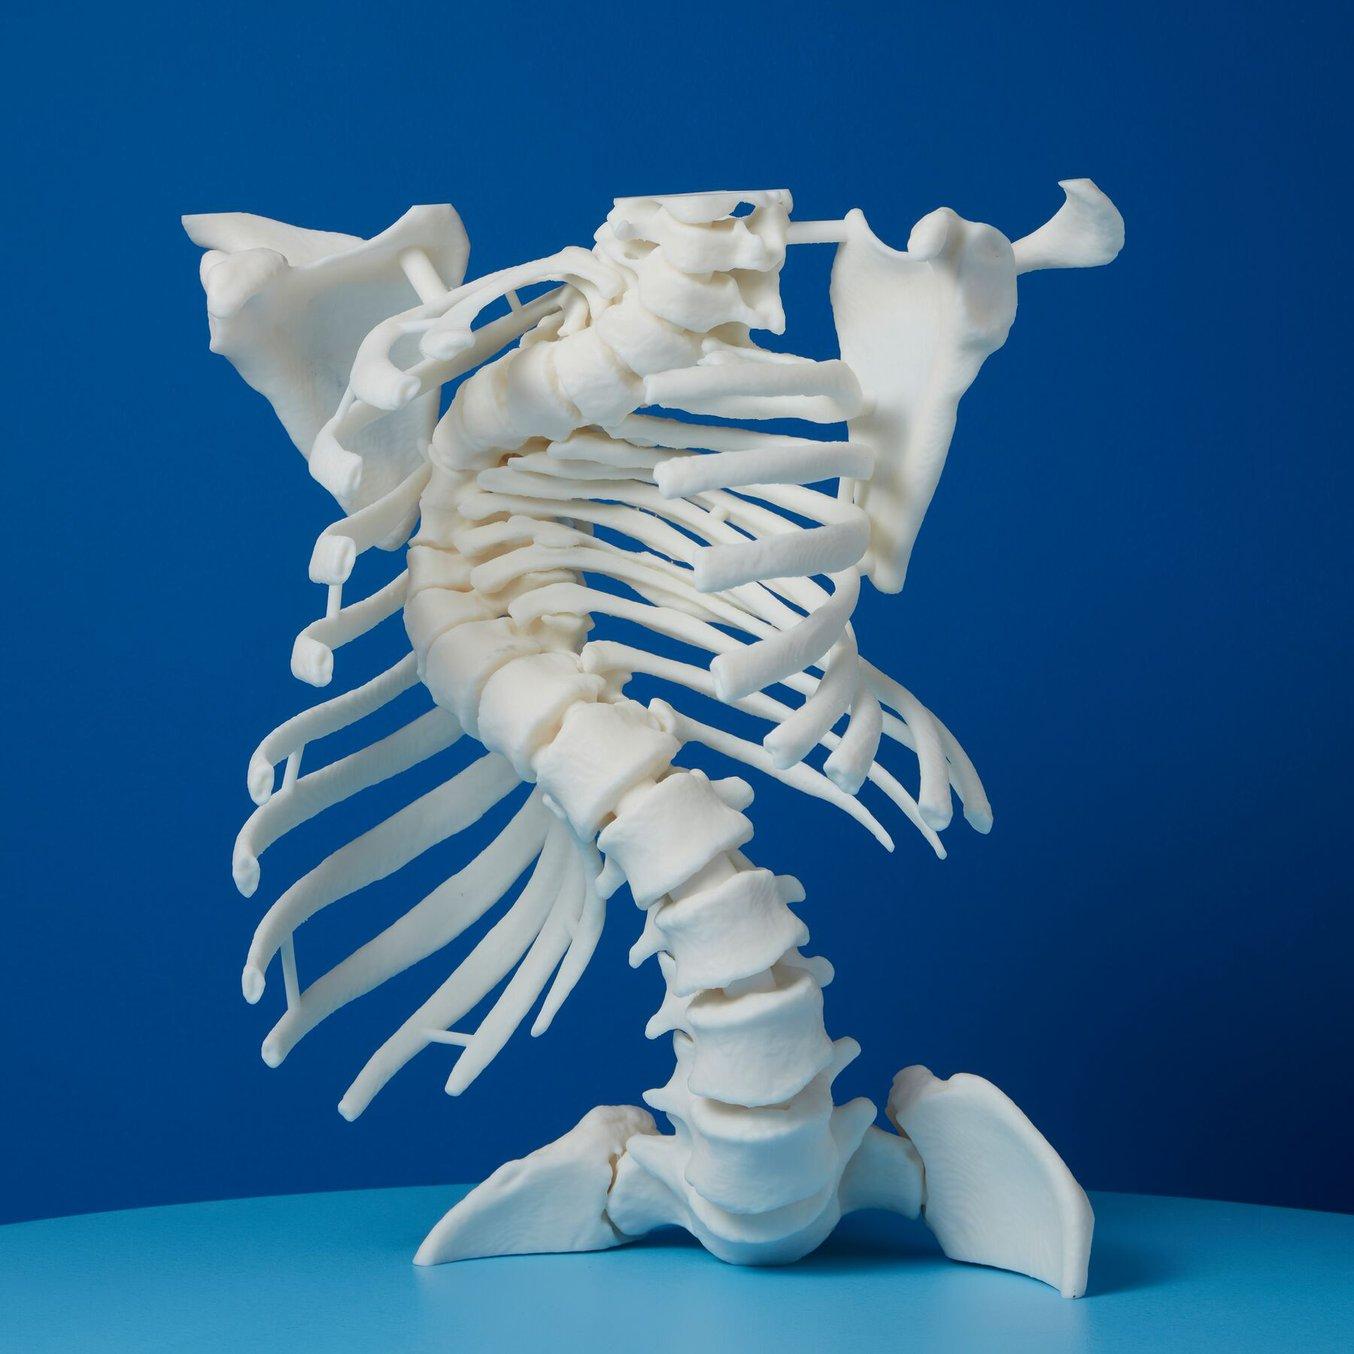 3D Printed Medical Part on a Blue Background